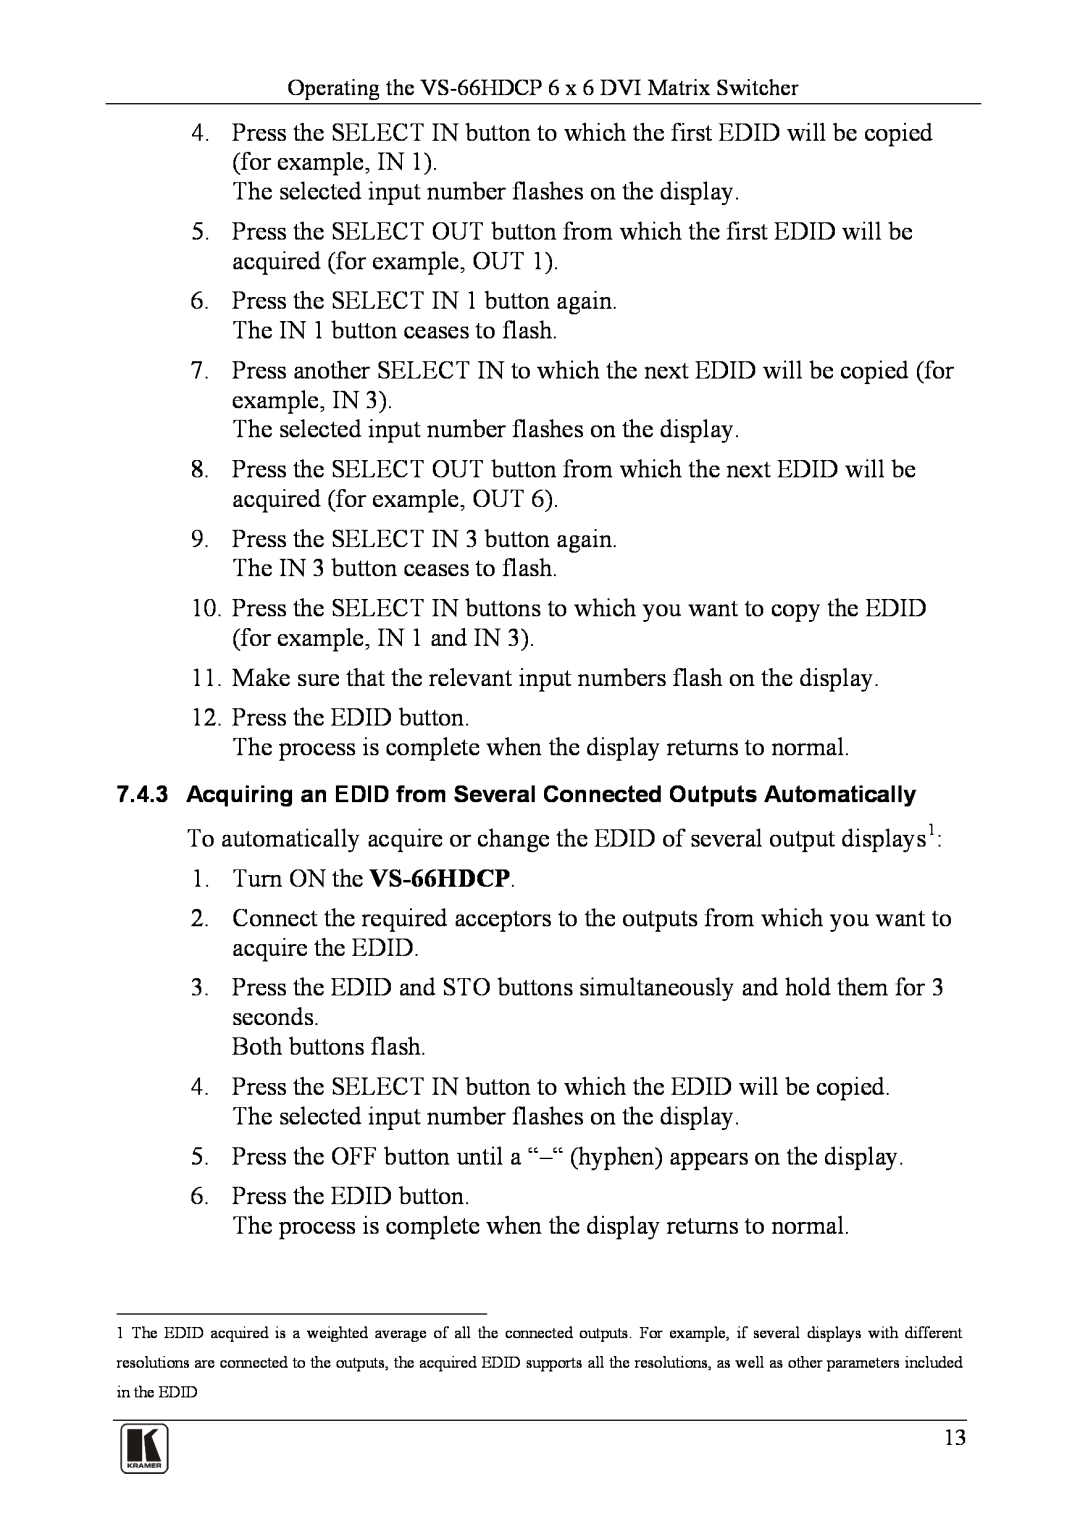 Kramer Electronics VS-66hdcp user manual Acquiring an EDID from Several Connected Outputs Automatically 